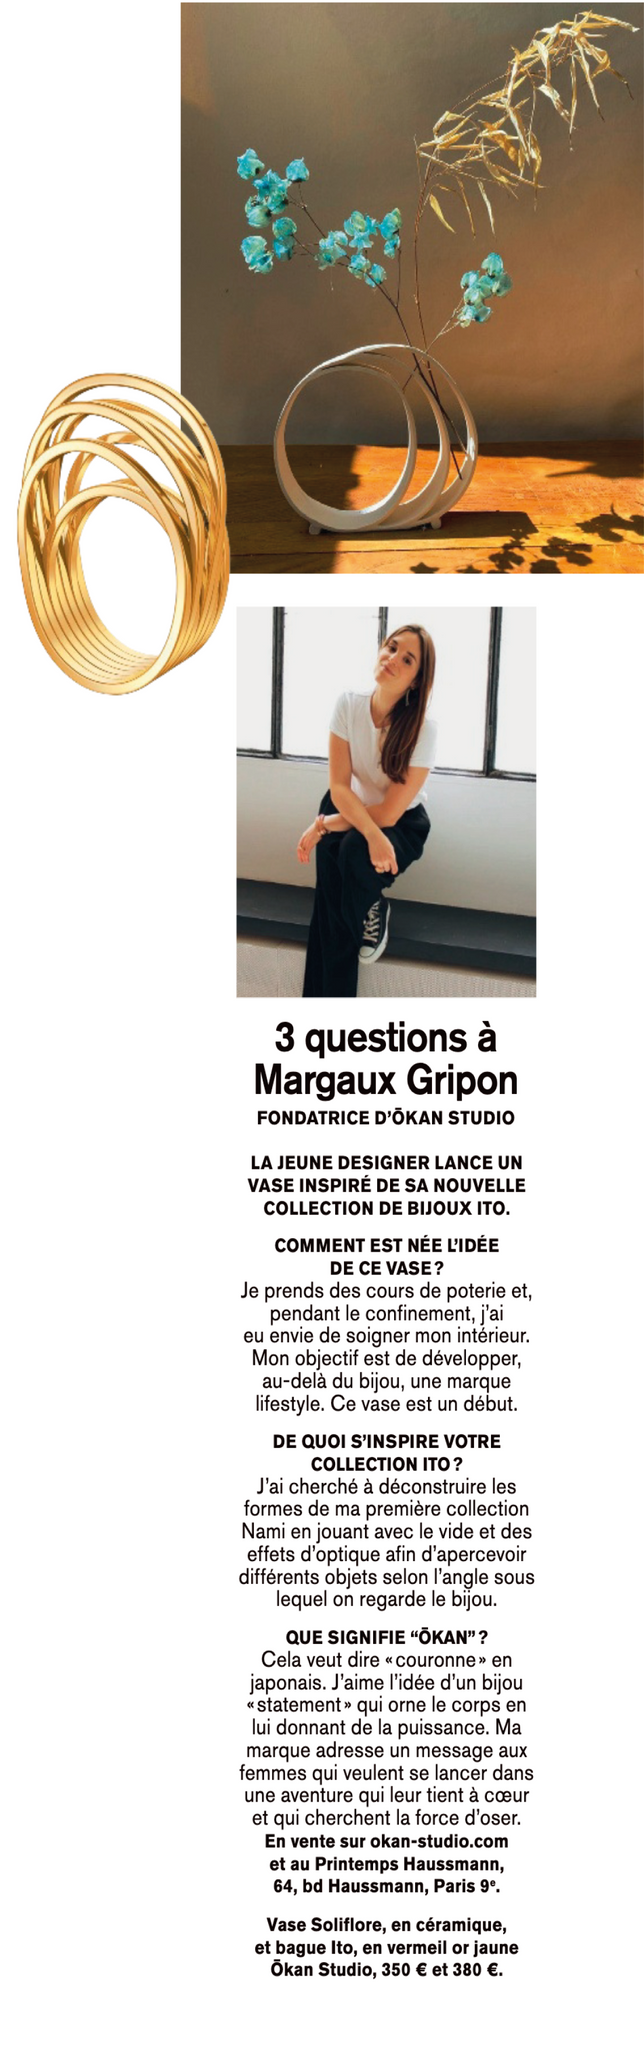 Marie Claire - 3 questions to Margaux Gripon